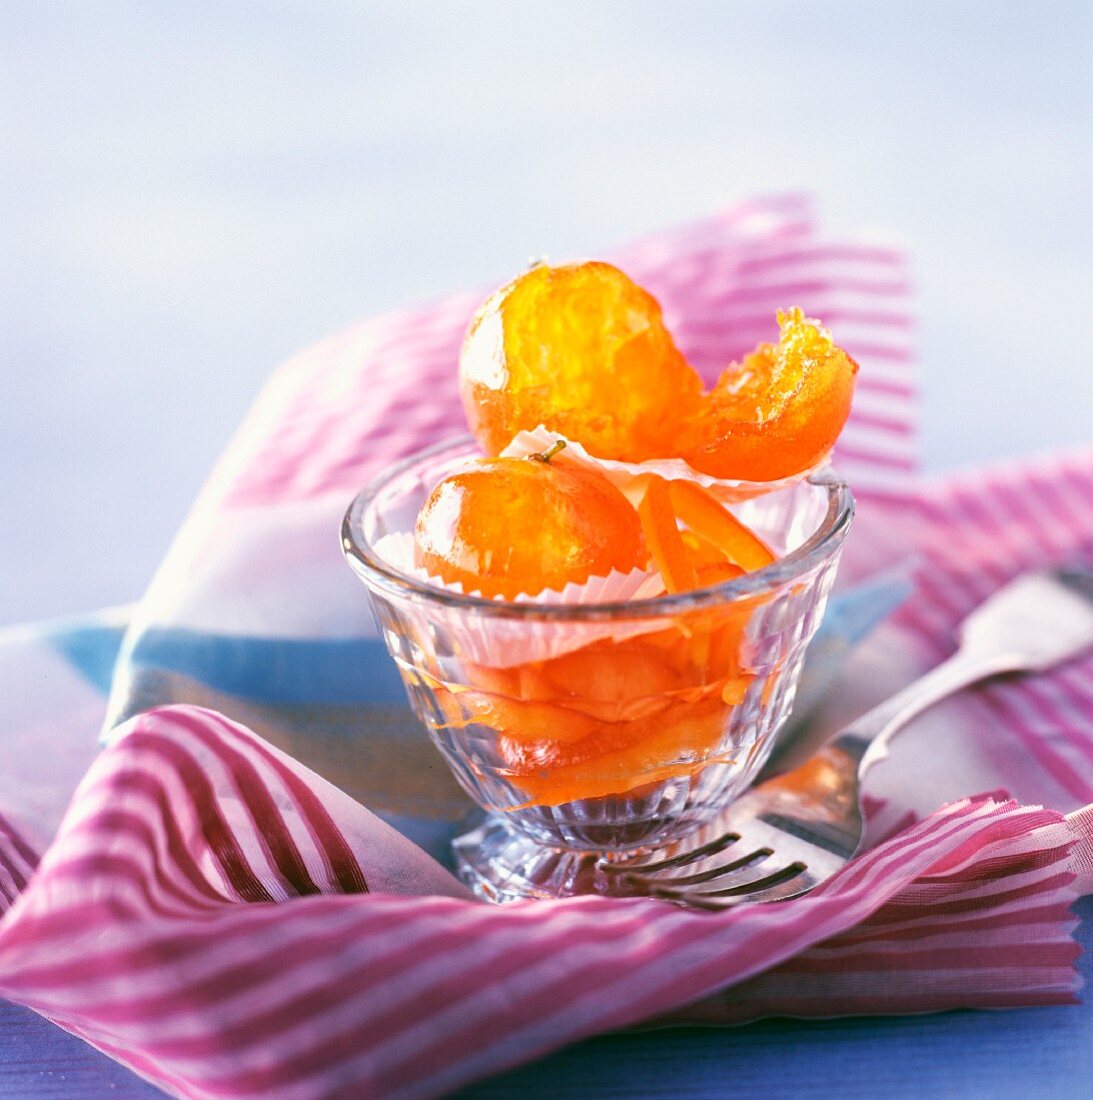 Candied clementines